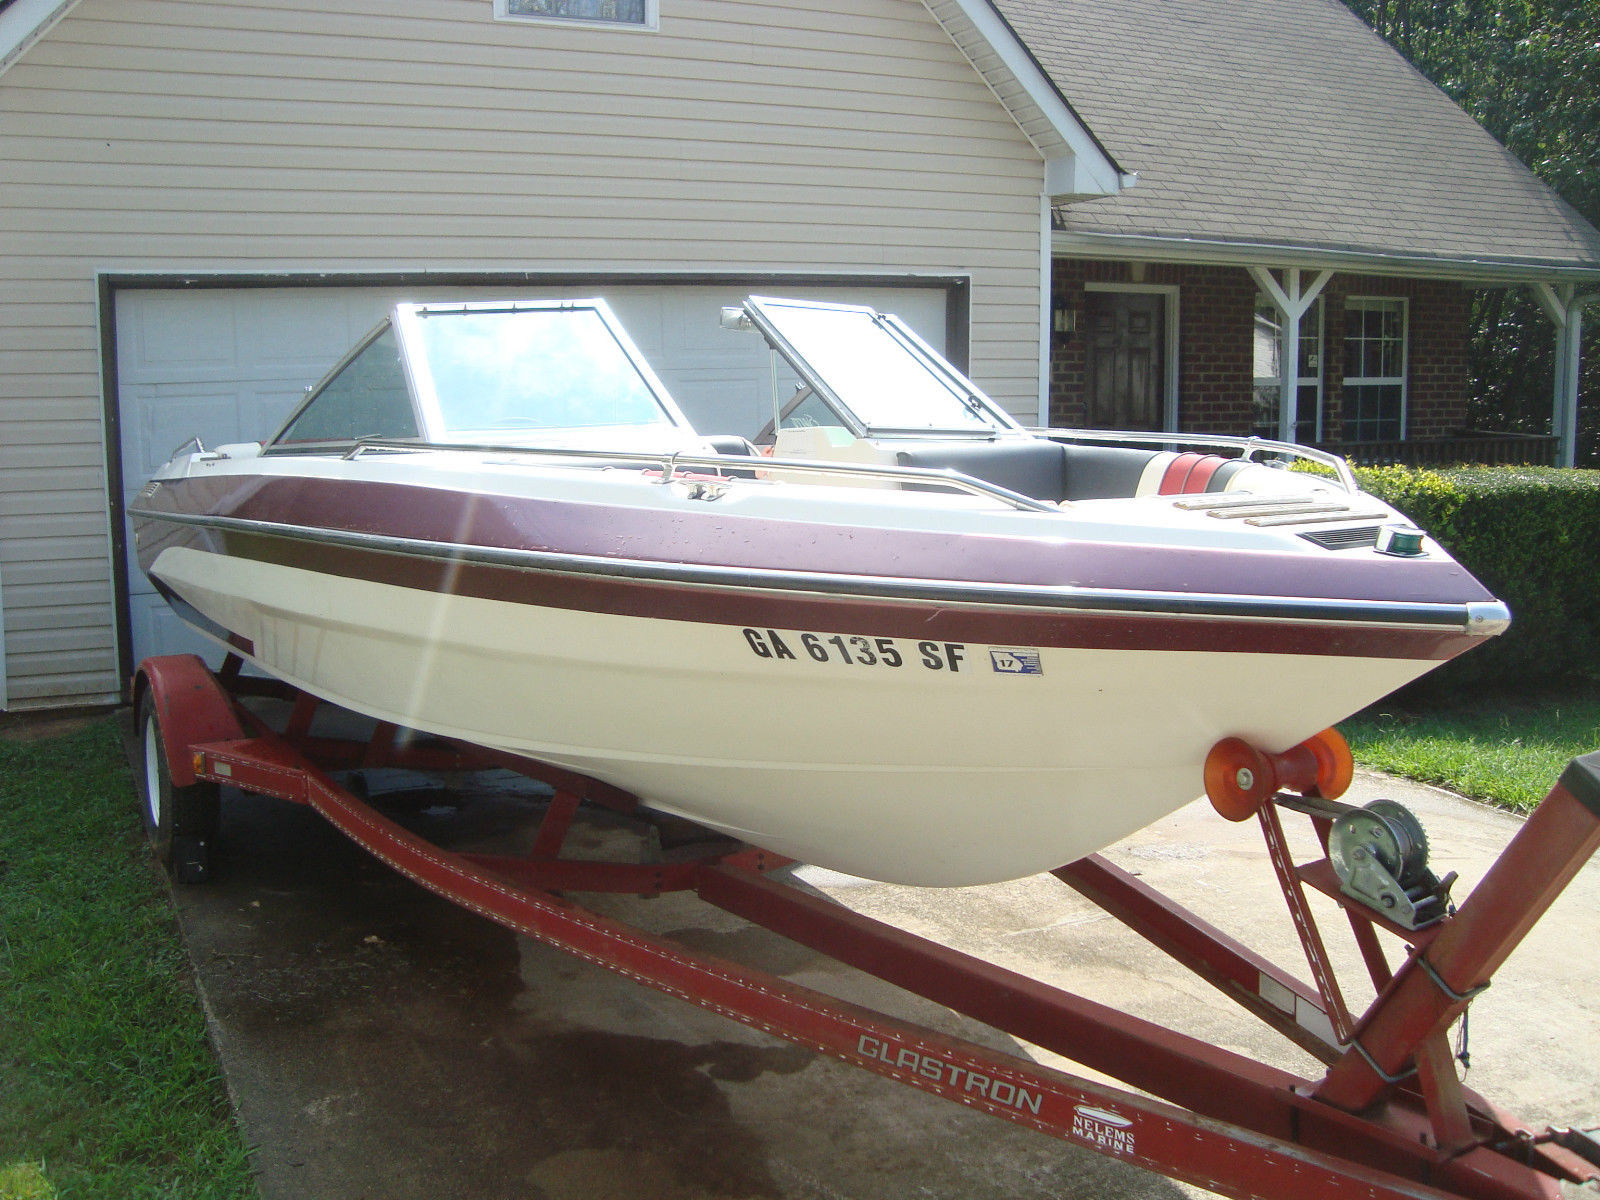 Glastron Sierra 1989 for sale for $2,200 - Boats-from-USA.com